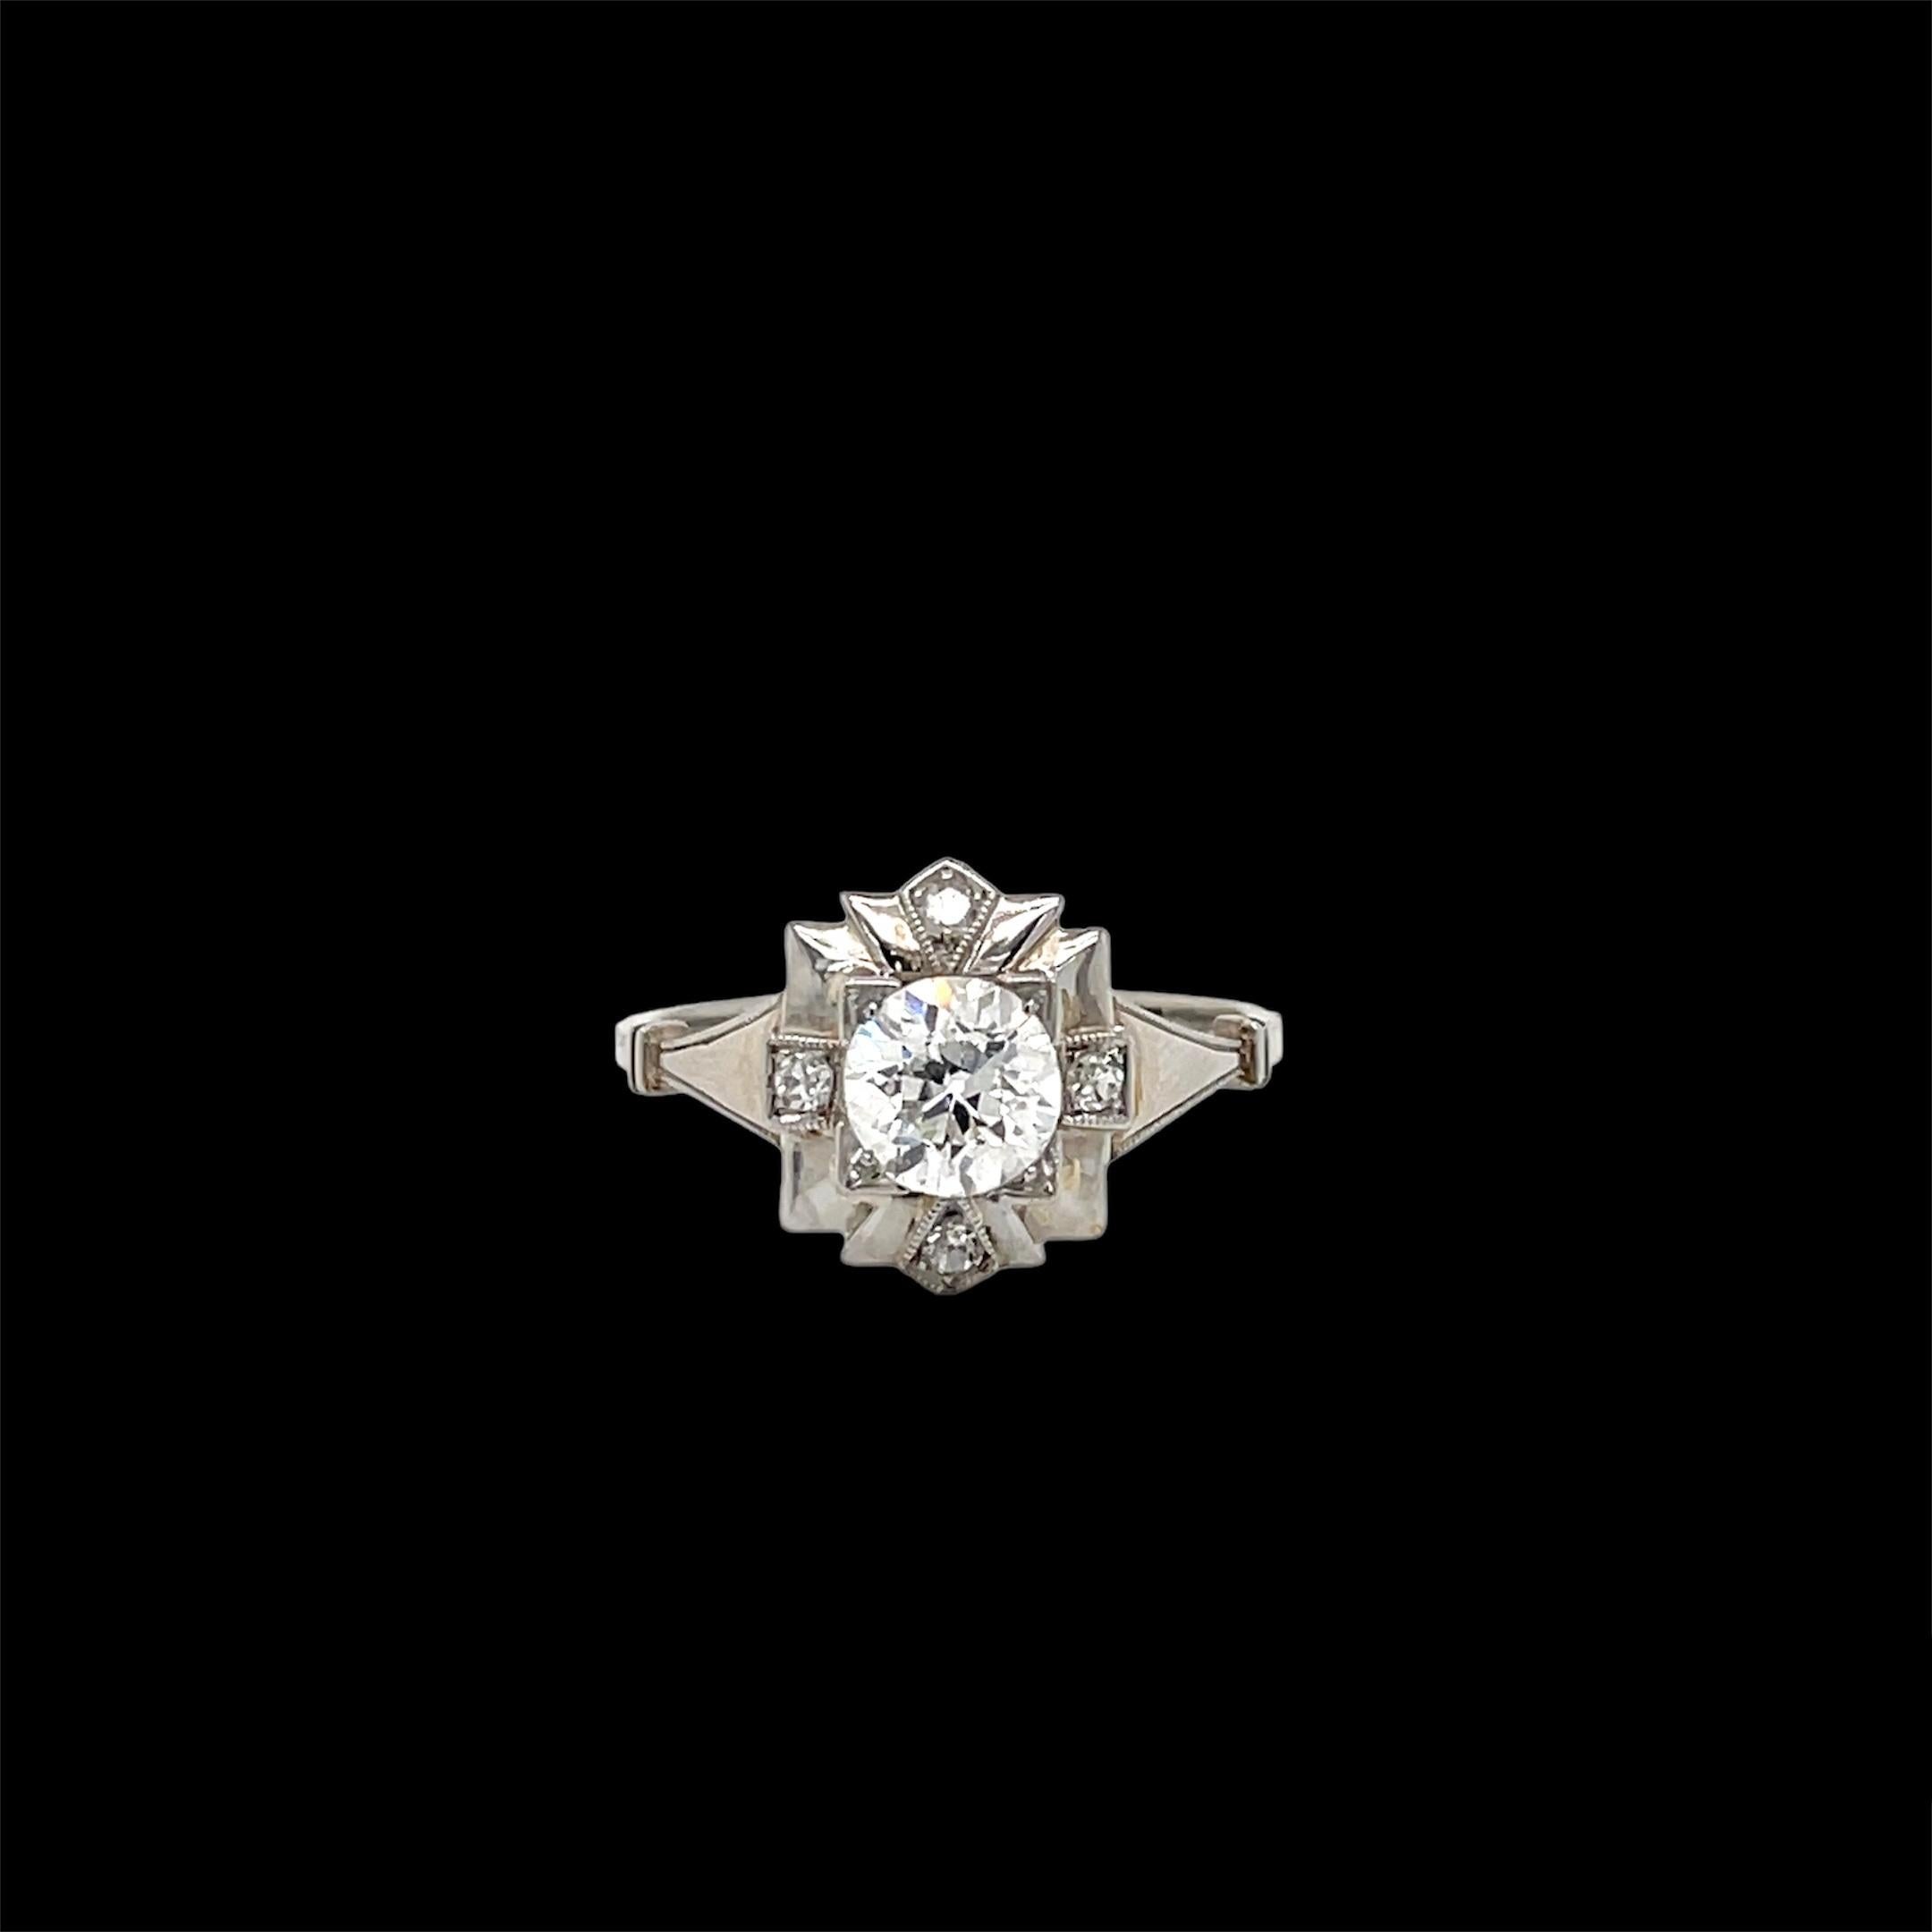 An exquisite Art Deco ring, hand-crafted in 18k white gold, authentic from 1930, featuring in the center sparkling Old European cut Diamond weighing .90 carat, surrounded by 0,10 carats of smaller diamonds.

The ring is original in every part,